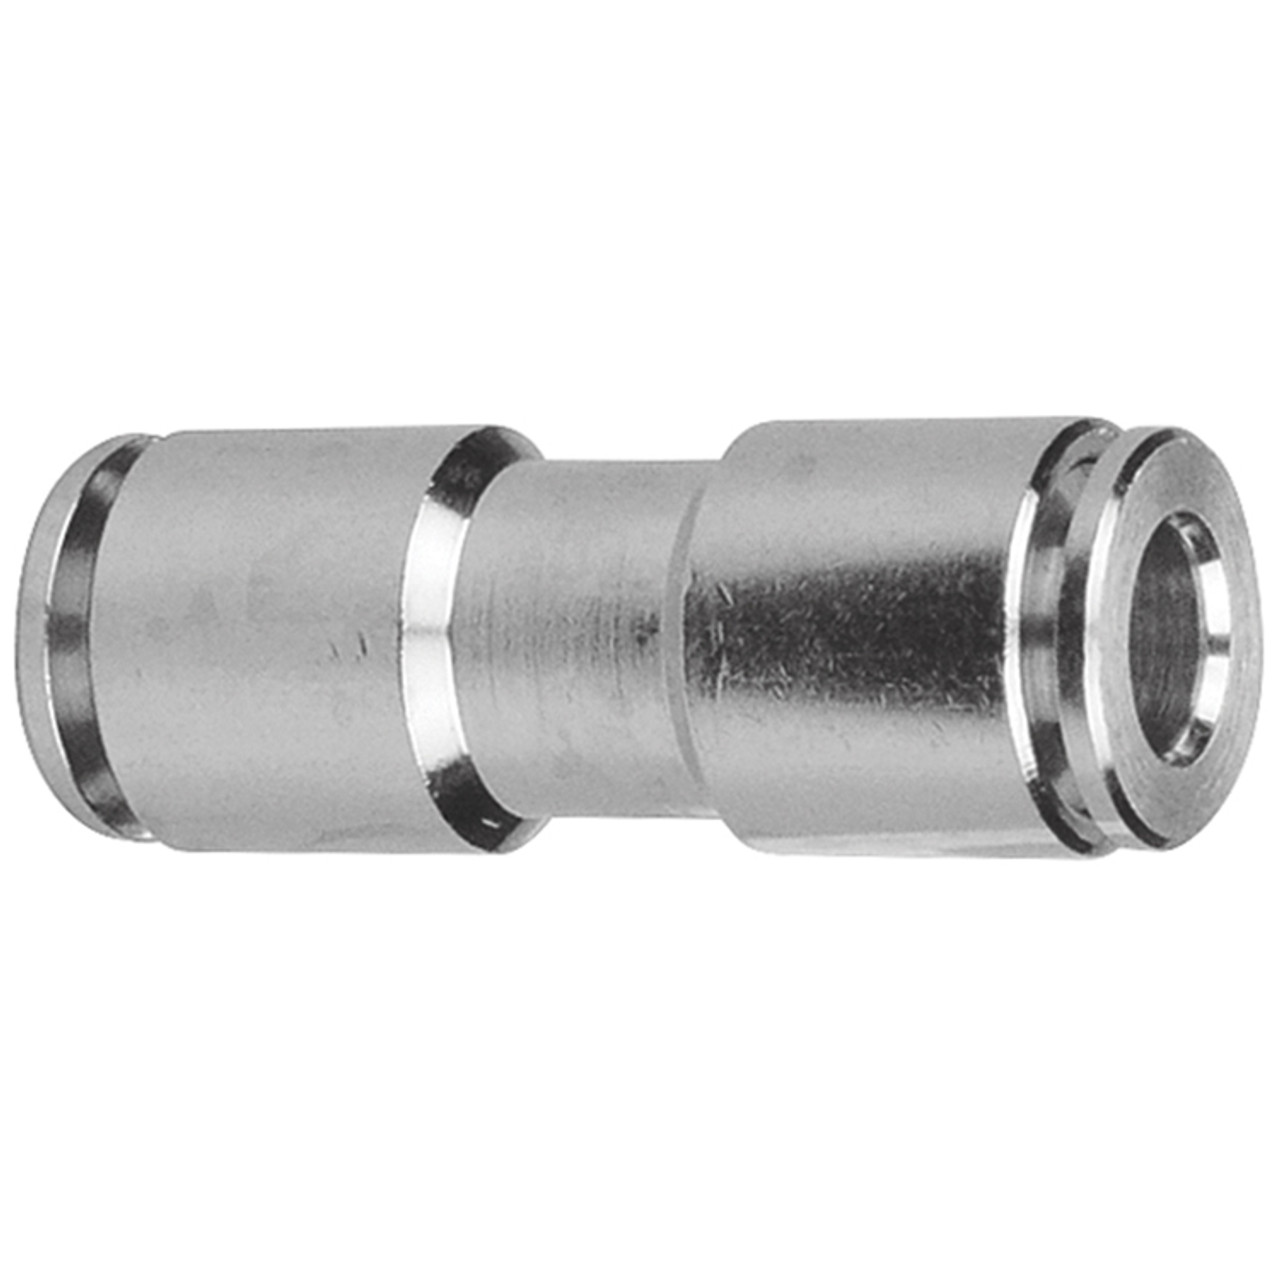 12mm Nickel Plated Brass Push-To-Connect Union   G6060PM-12M-12M